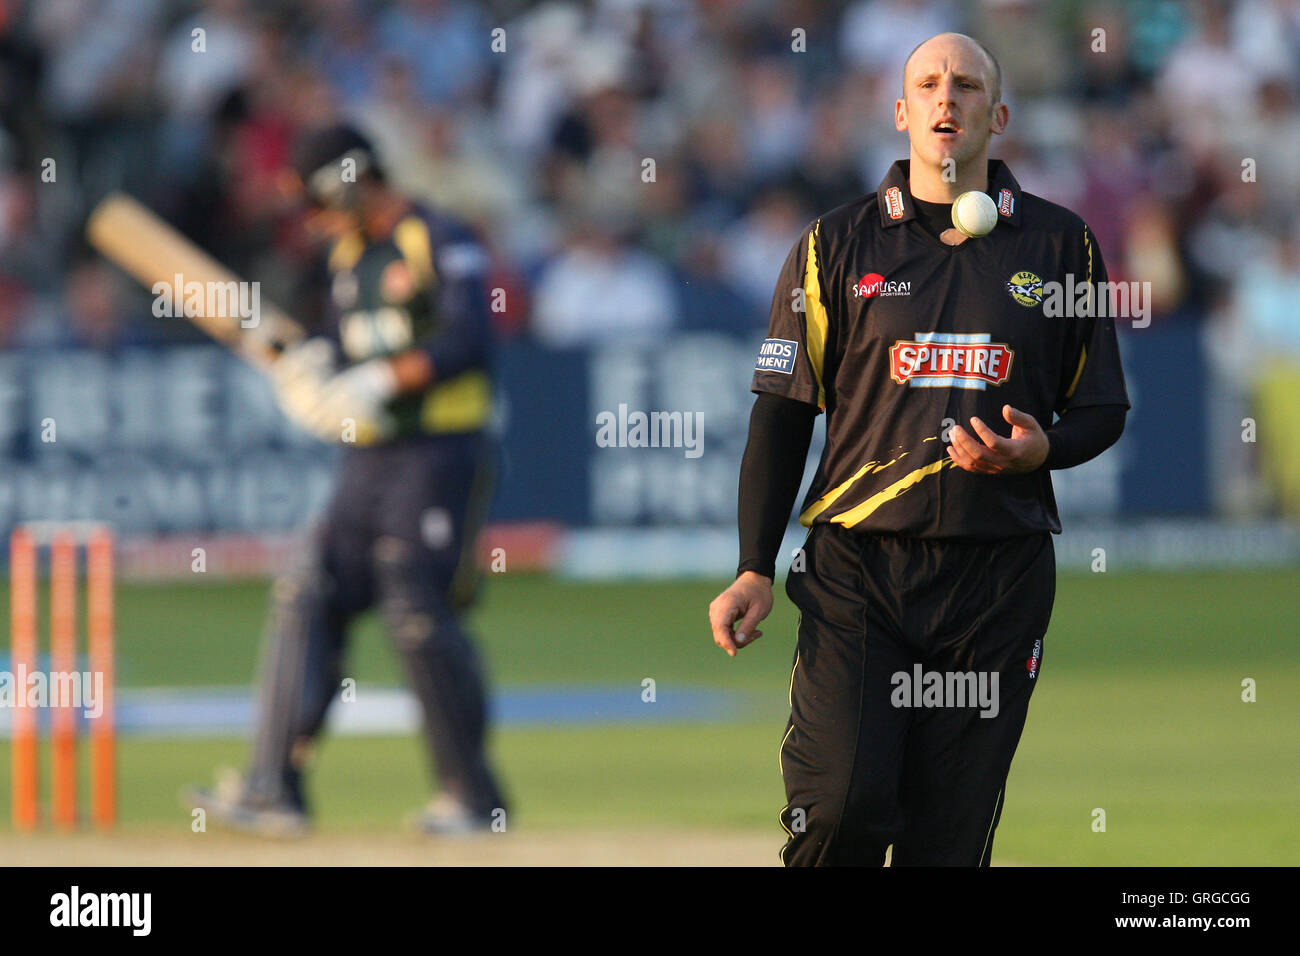 James Tredwell of Kent prepares to bowl - Essex Eagles vs Kent Spitfires - Friends Provident Twenty 20 T20 Cricket at the Ford County Ground, Chelmsford -  02/06/10 Stock Photo